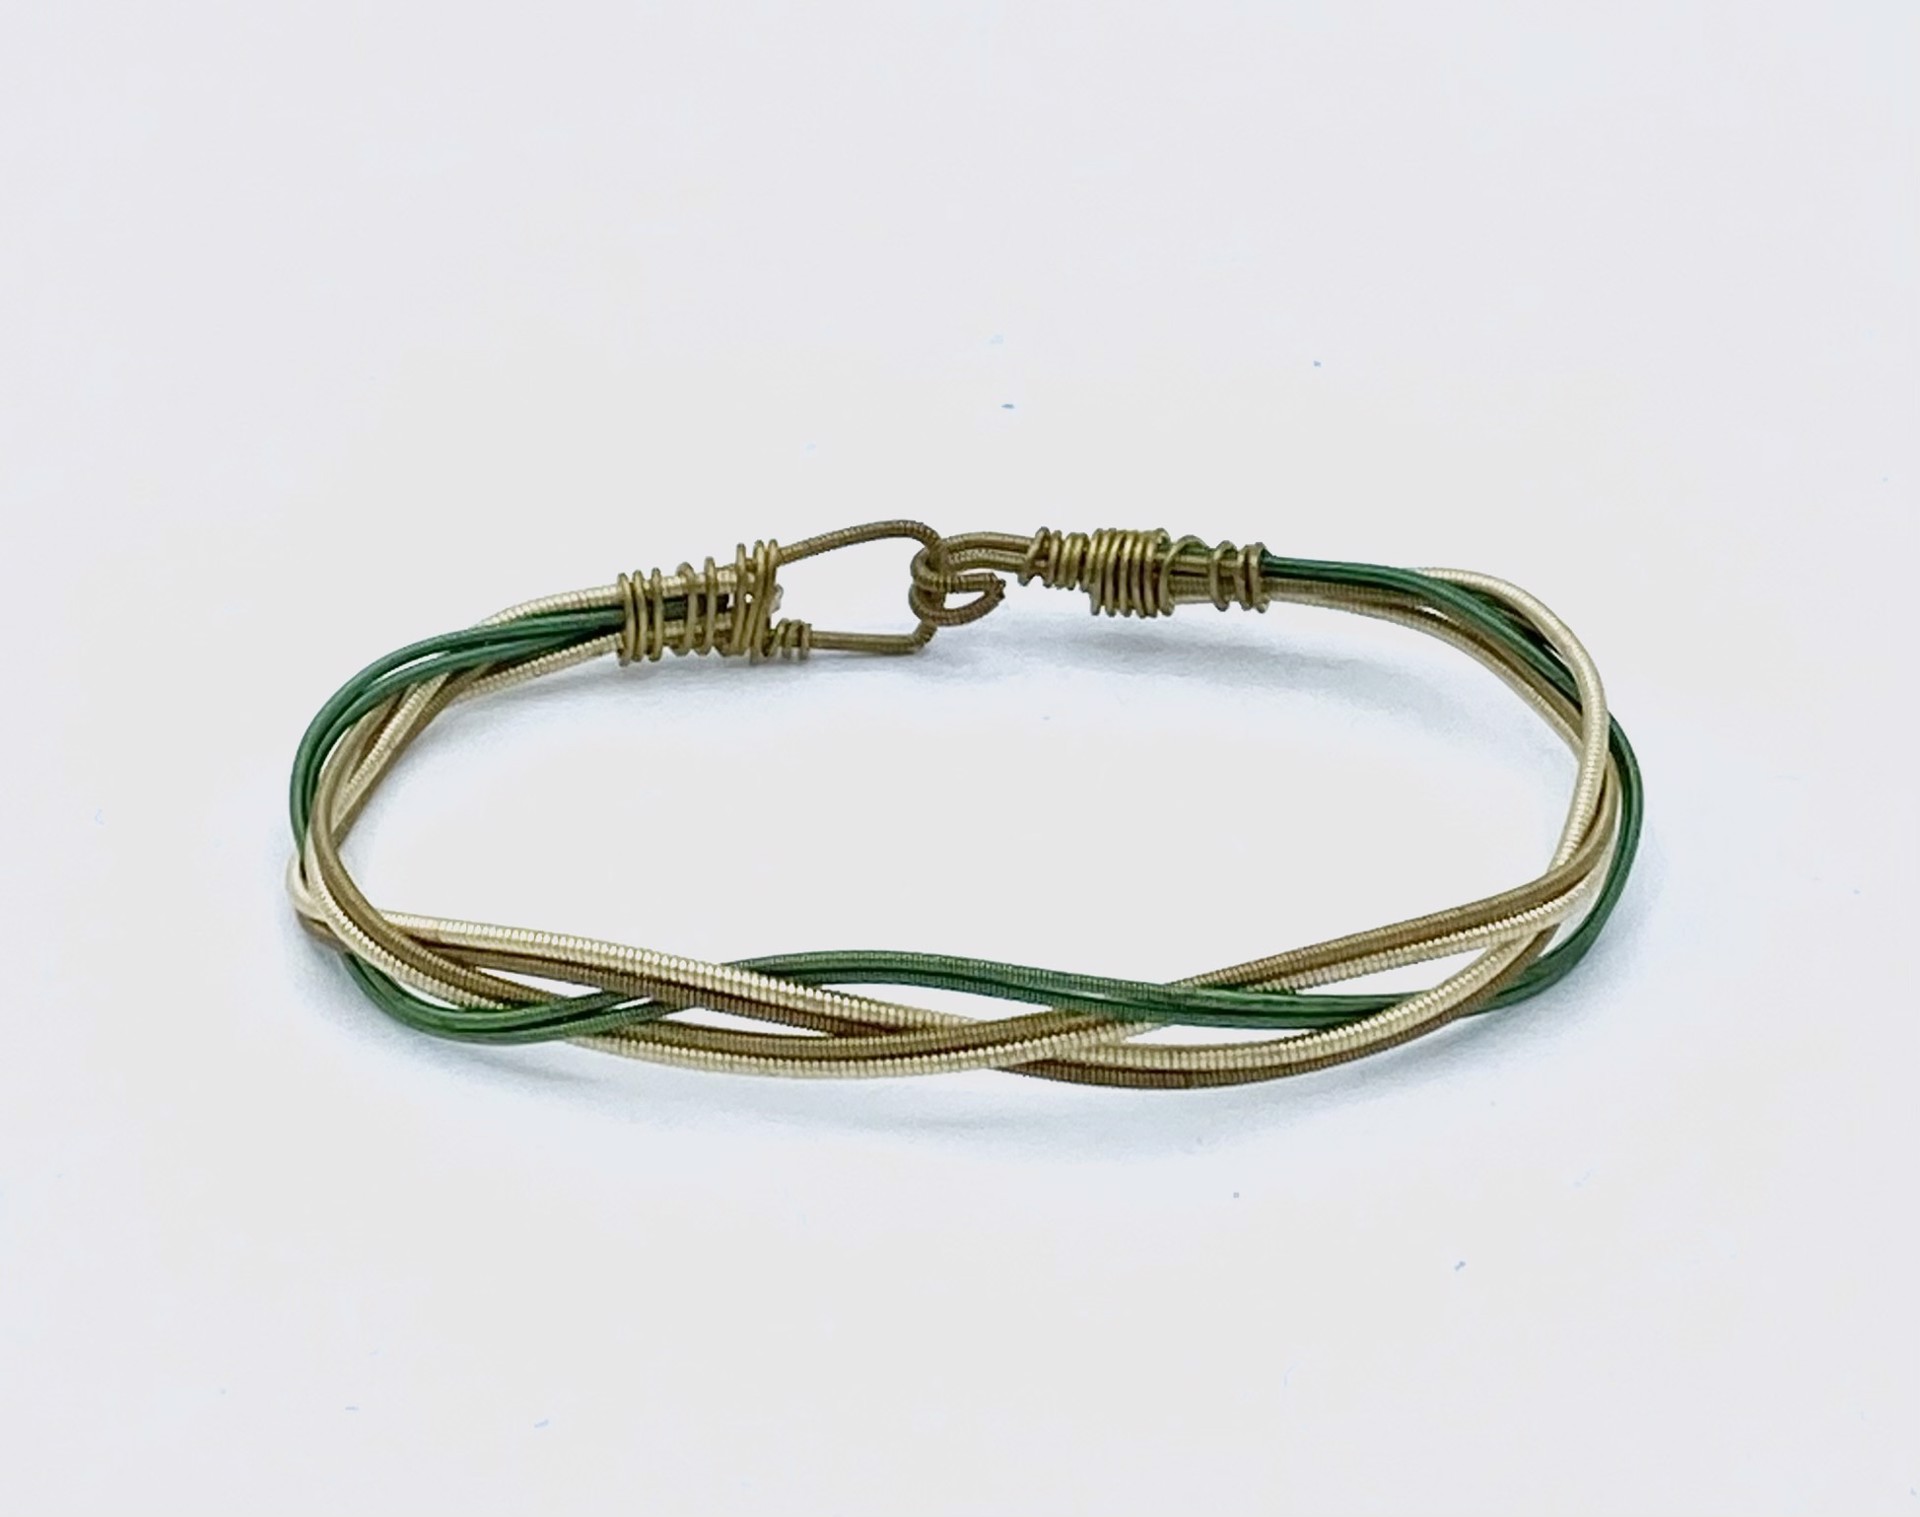 Guitar String Gold and Silver Bracelet by String Thing Designs